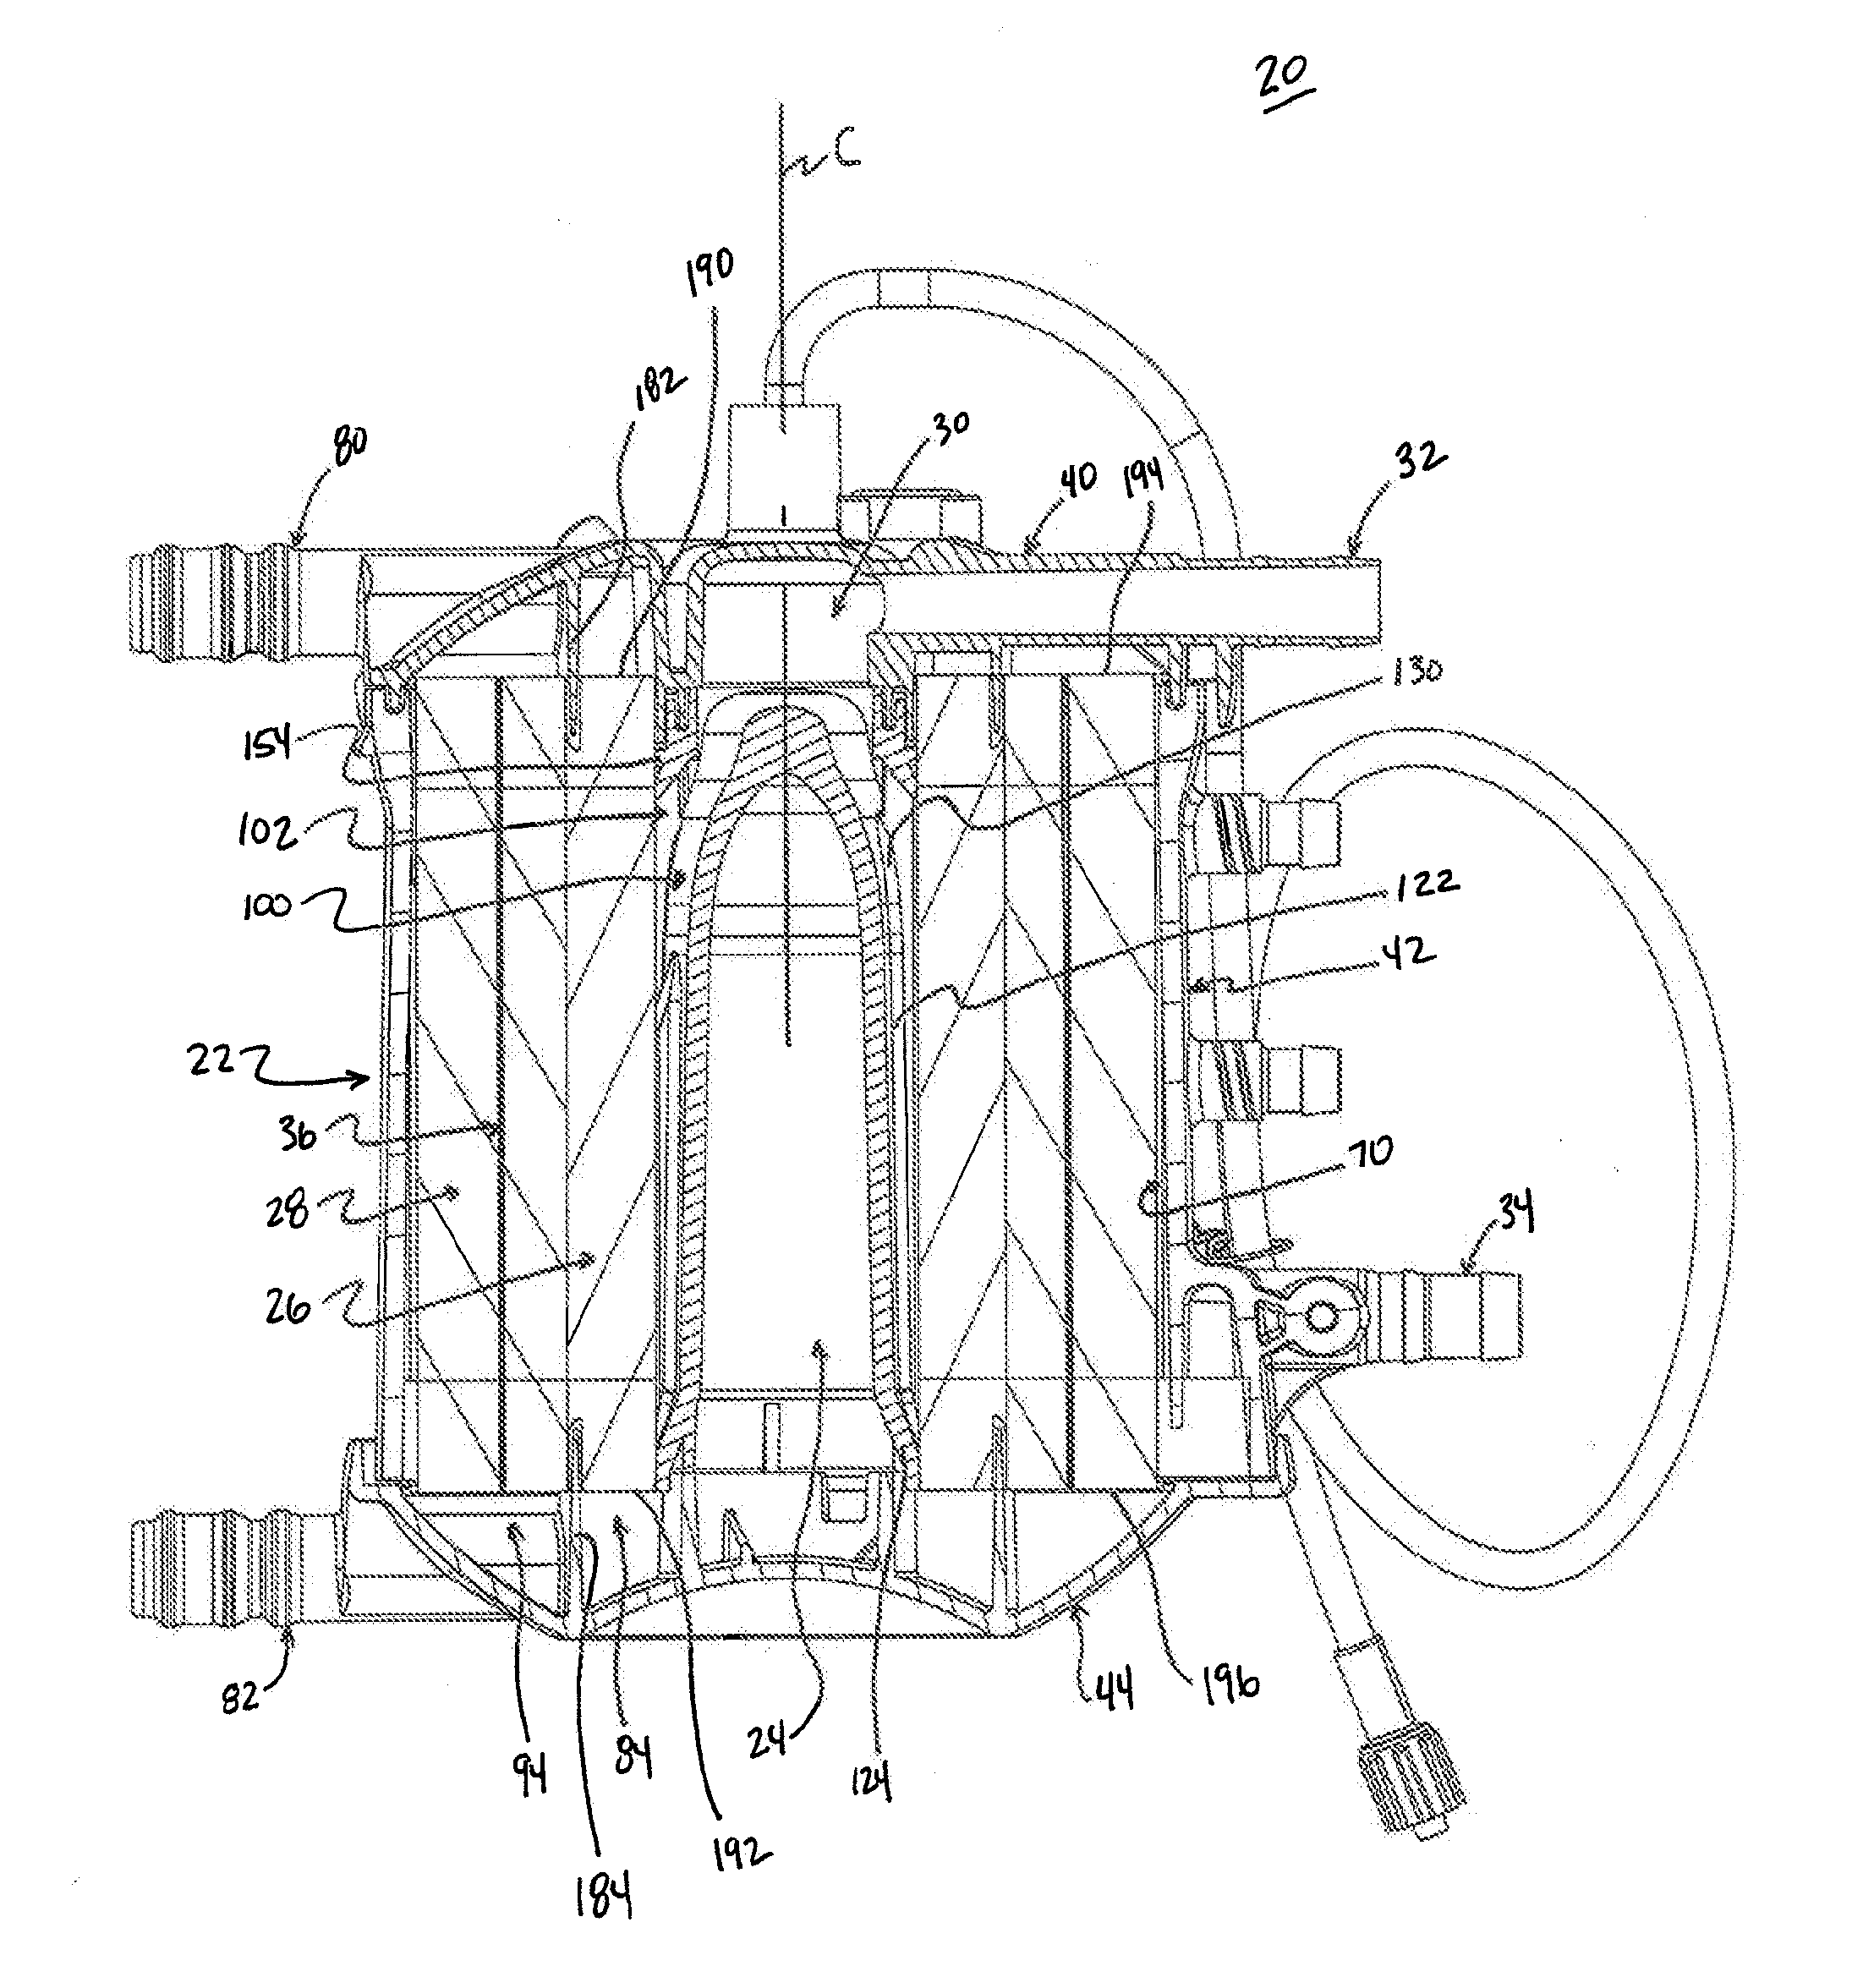 De-Airing Oxygenator for Treating Blood in an Extracorporeal Blood Circuit